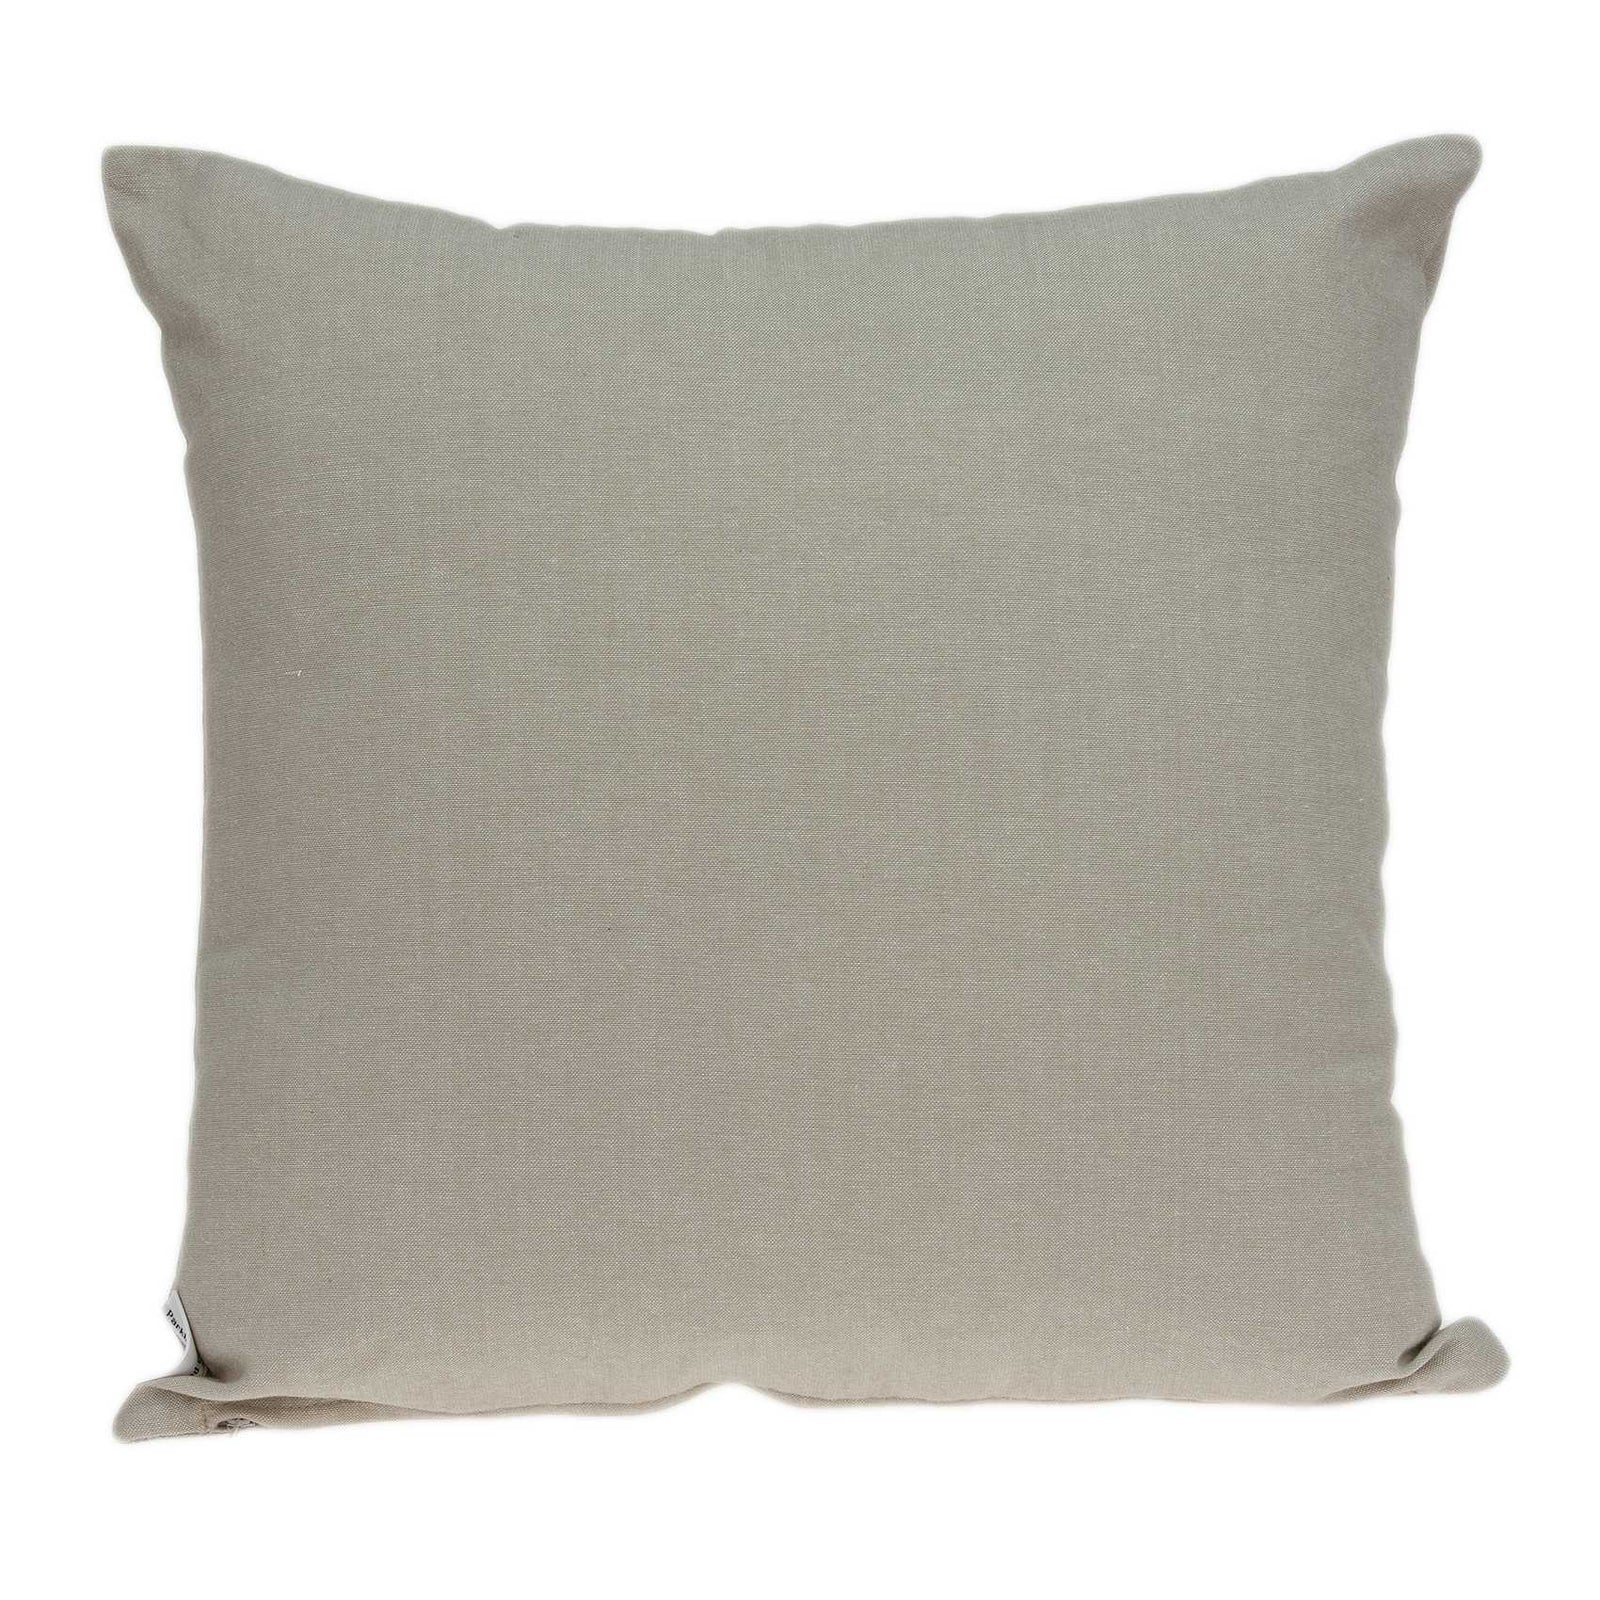 20" X 7" X 20" Decorative Transitional Beige Pillow Cover With Poly Insert